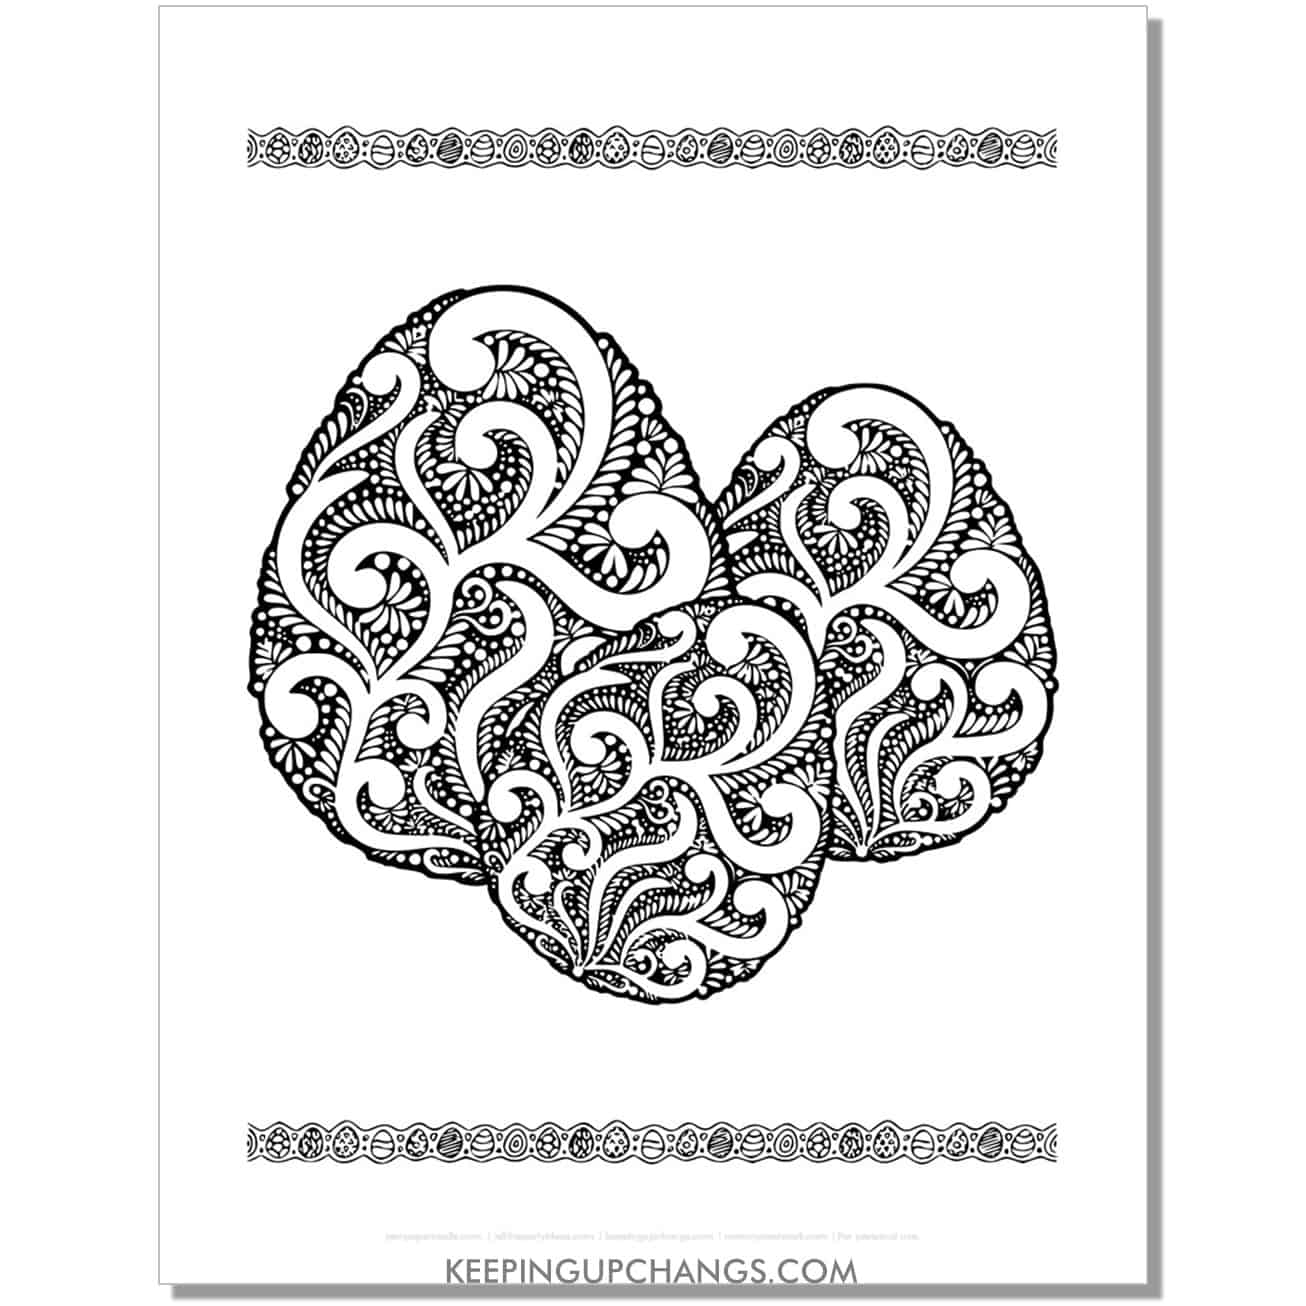 free advanced zentangle easter egg coloring page, sheet.